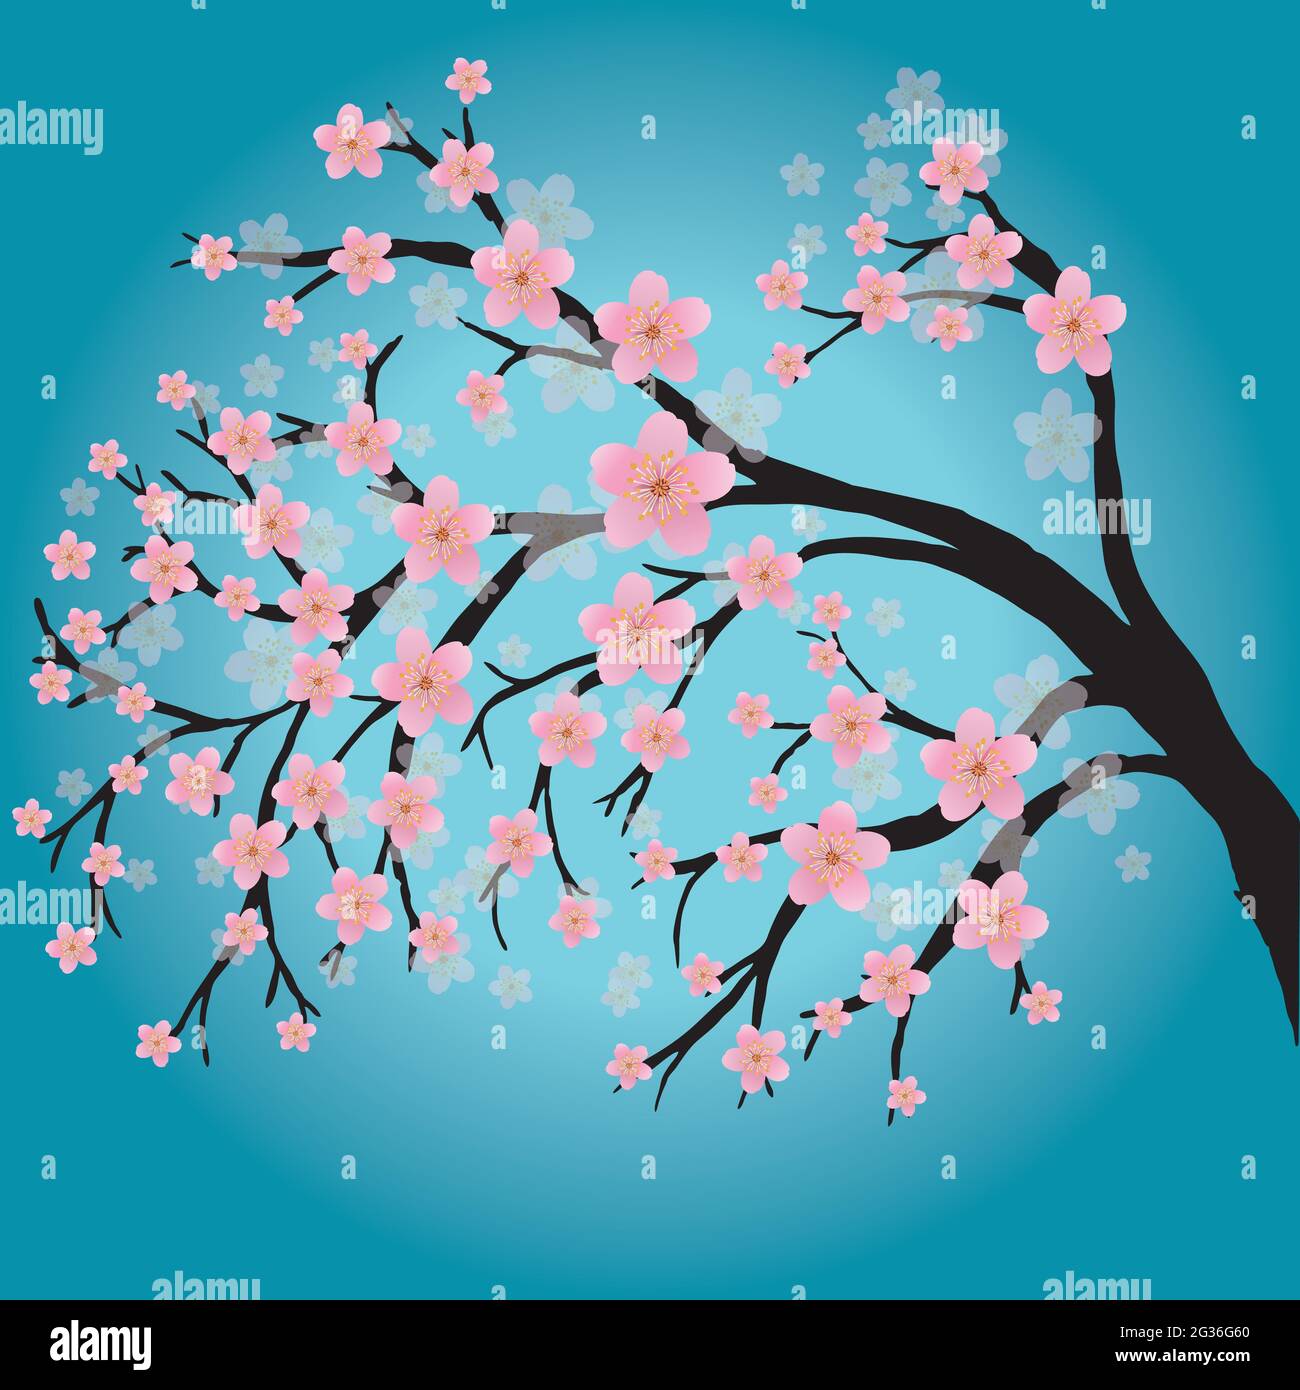 A branch with pink flowers. Based on a cherry blossom or sakura. The background is a turquoise gradient. Stock Vector